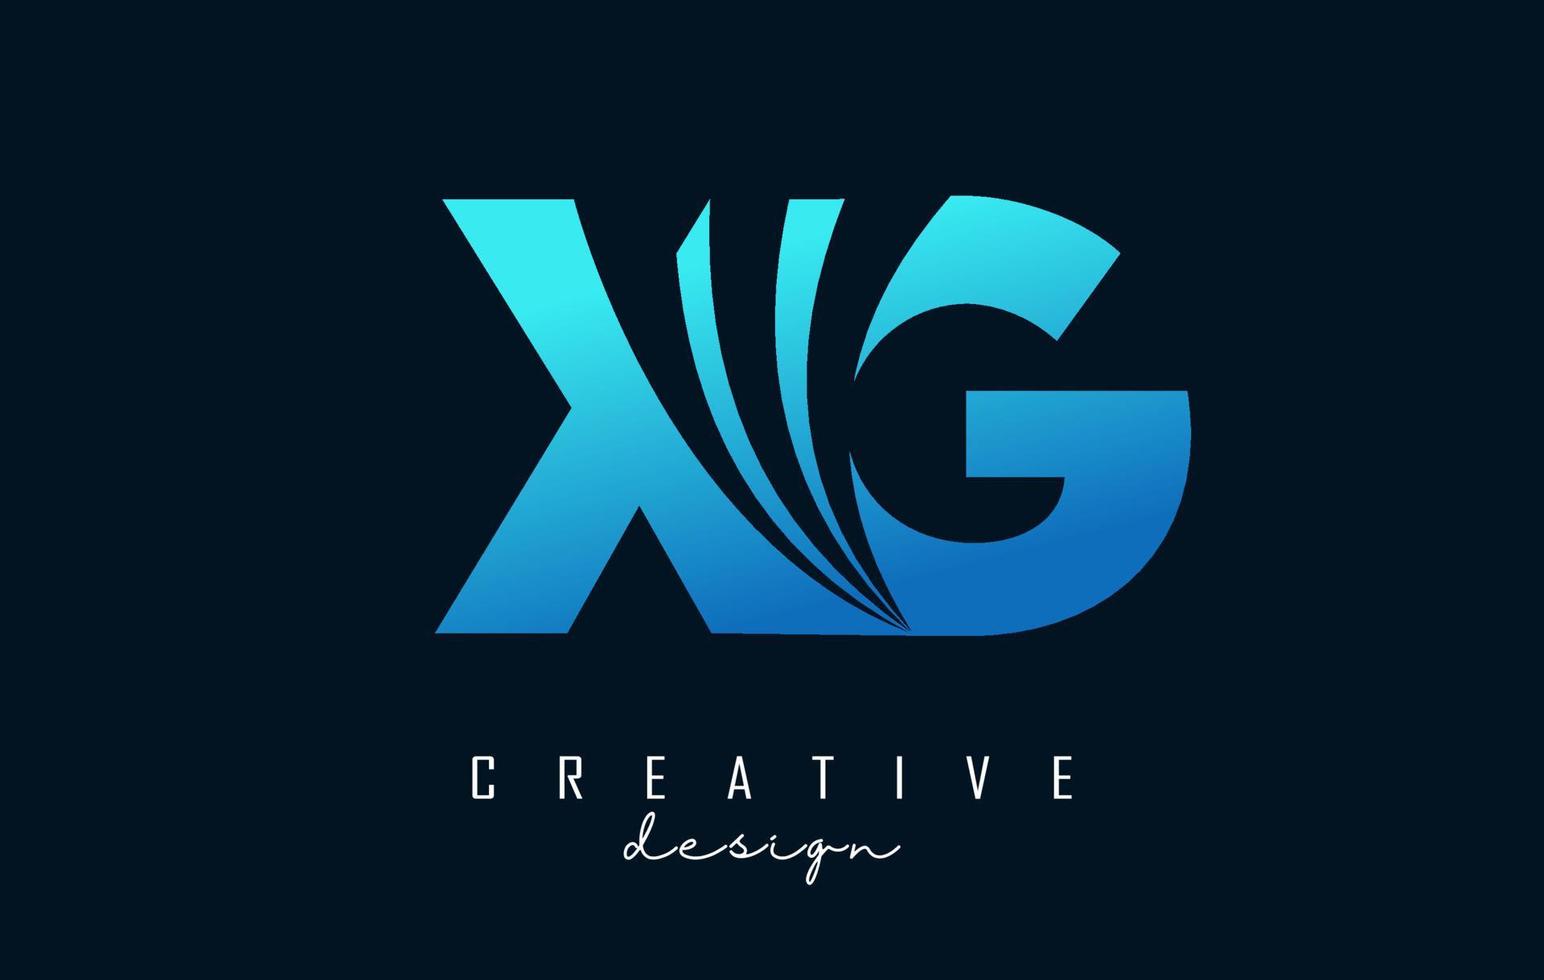 Creative blue letters XG x g logo with leading lines and road concept design. Letters with geometric design. vector